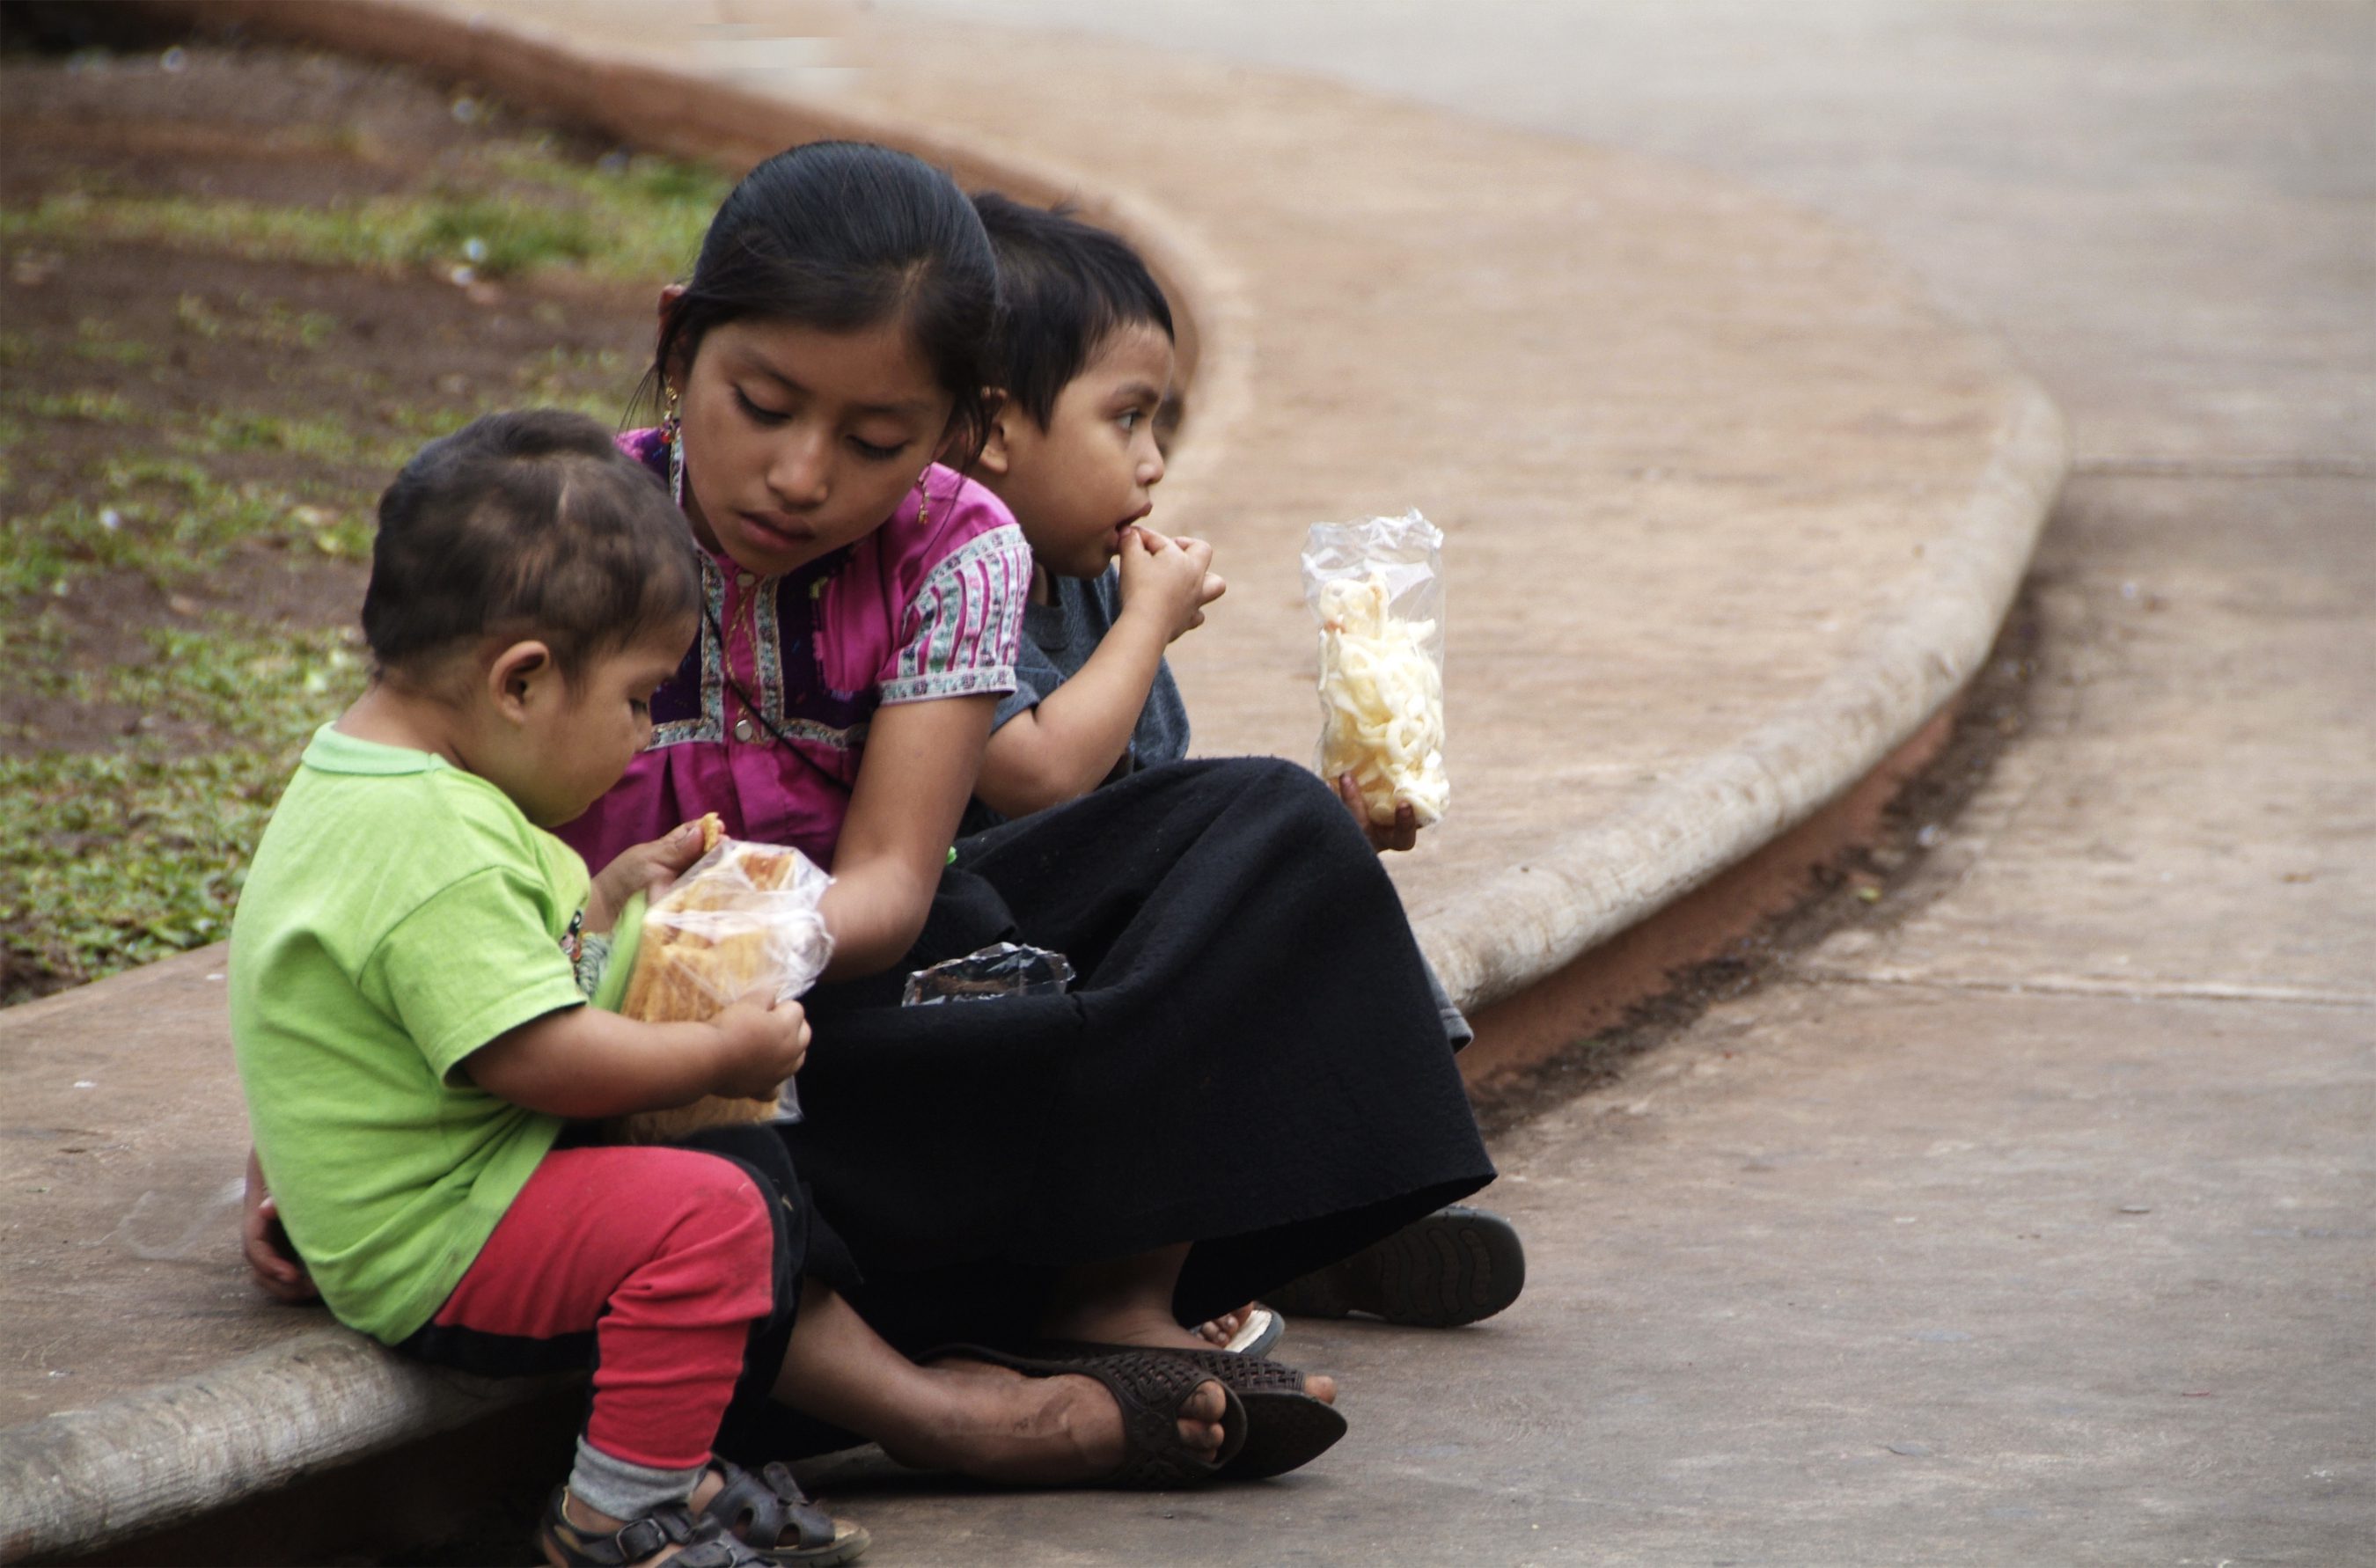 Three kids sit on a curb in Mexico while eating a snack. Margie Nea for Bread for the World.